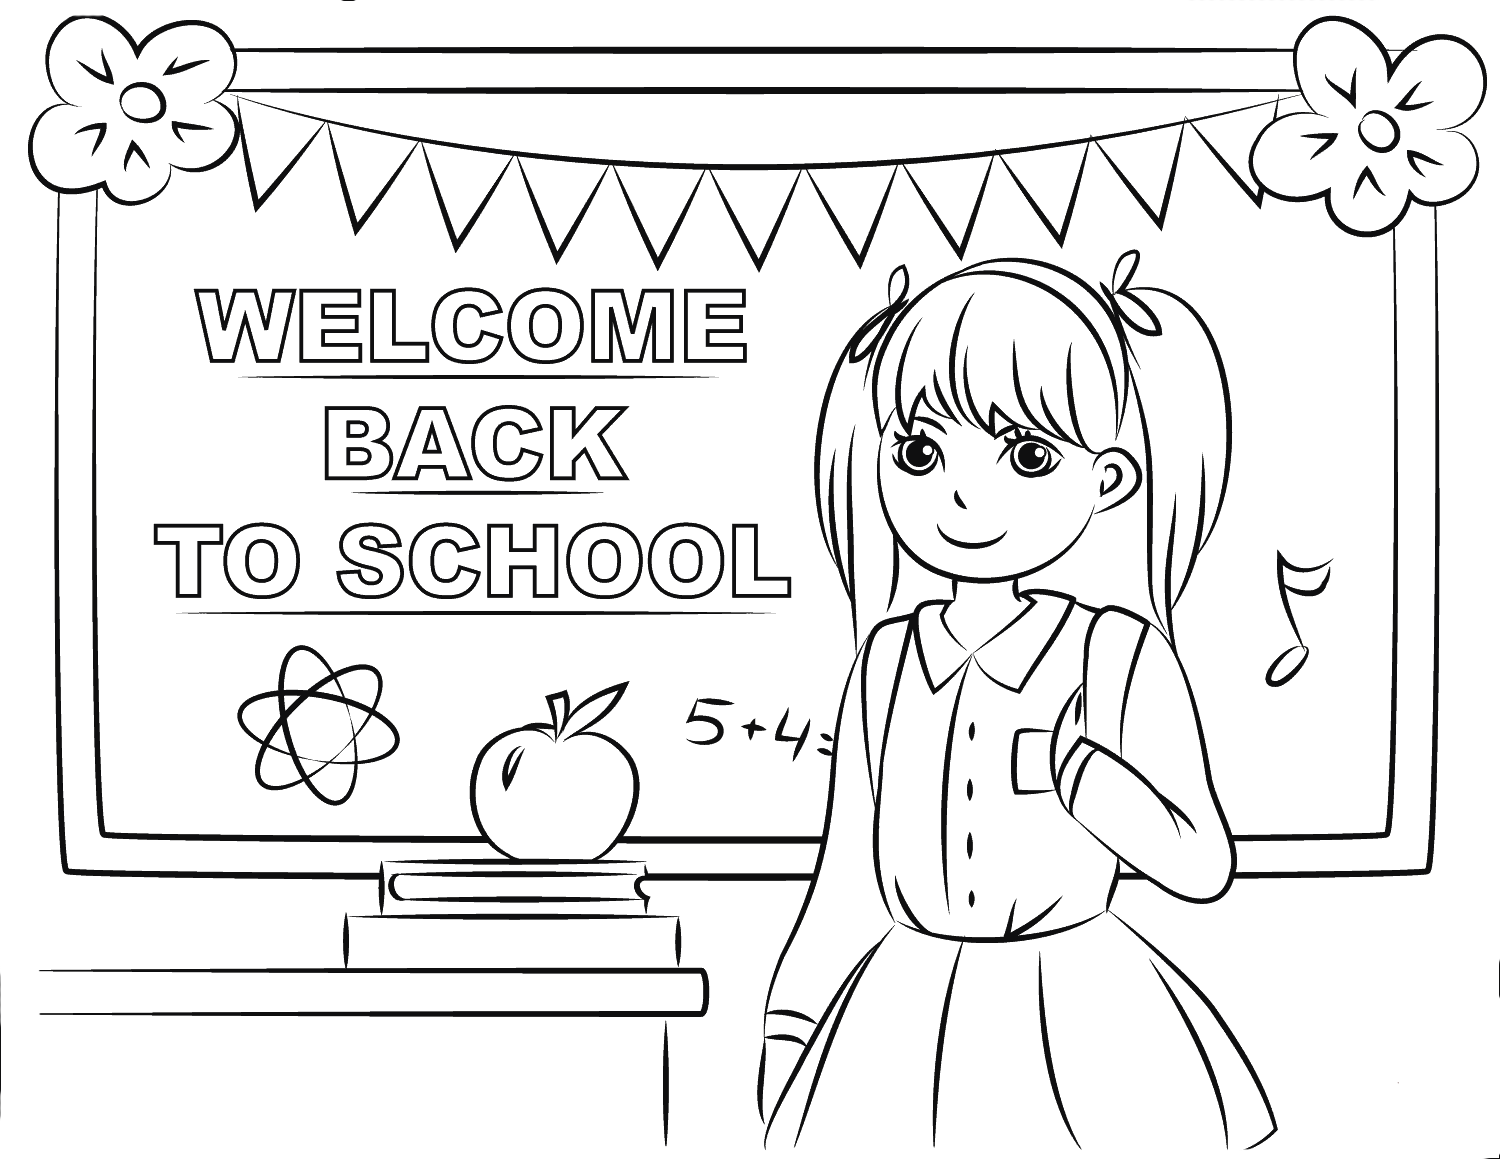 Welcome Back to School from Fall